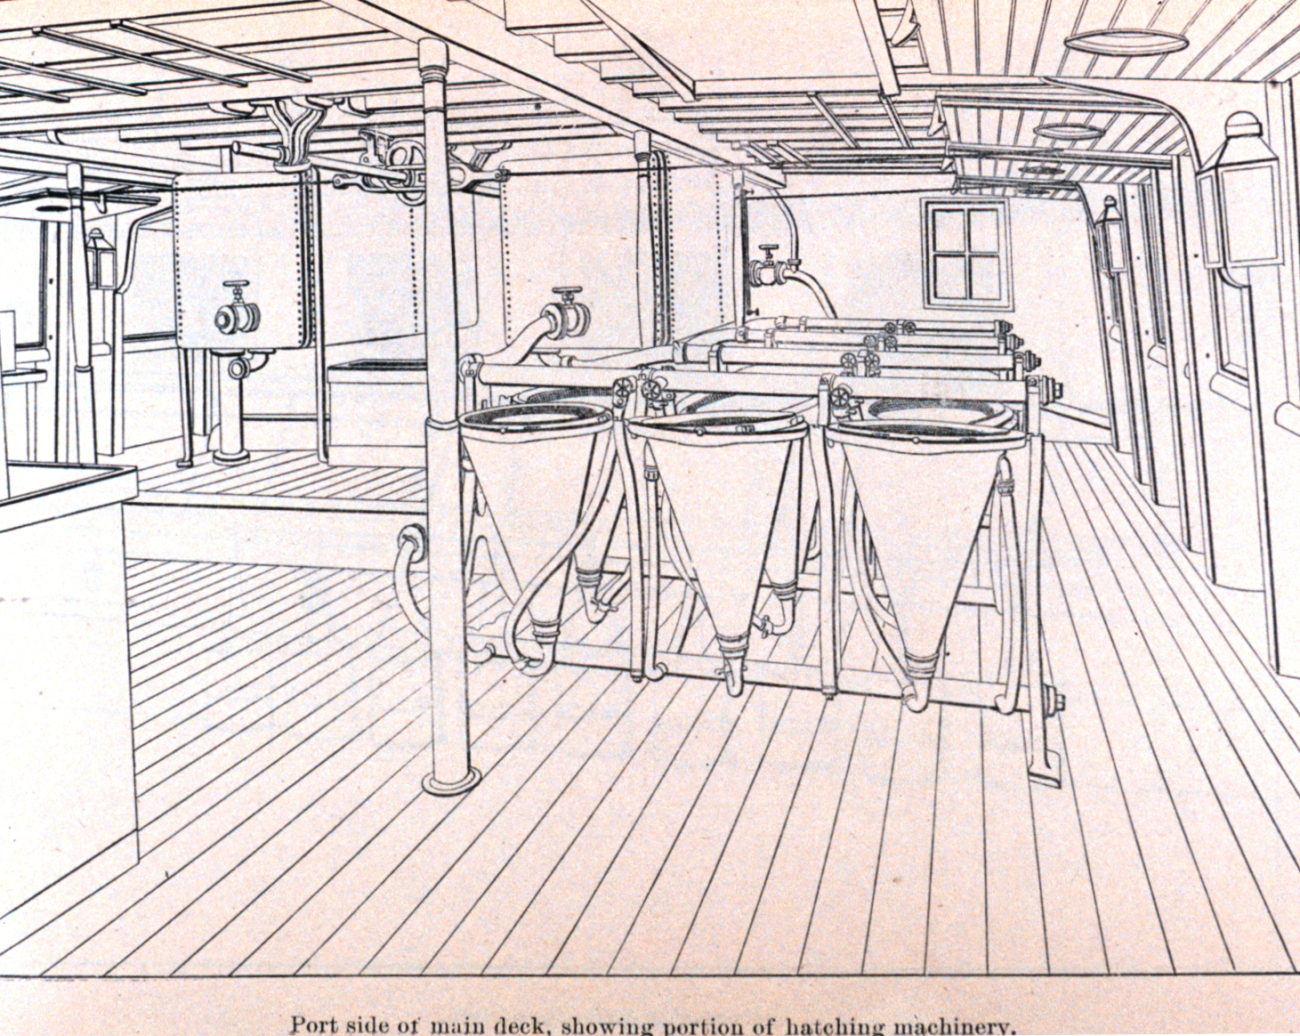 Port side of main deck of FISH-HAWK, showing portion of hatching machinery